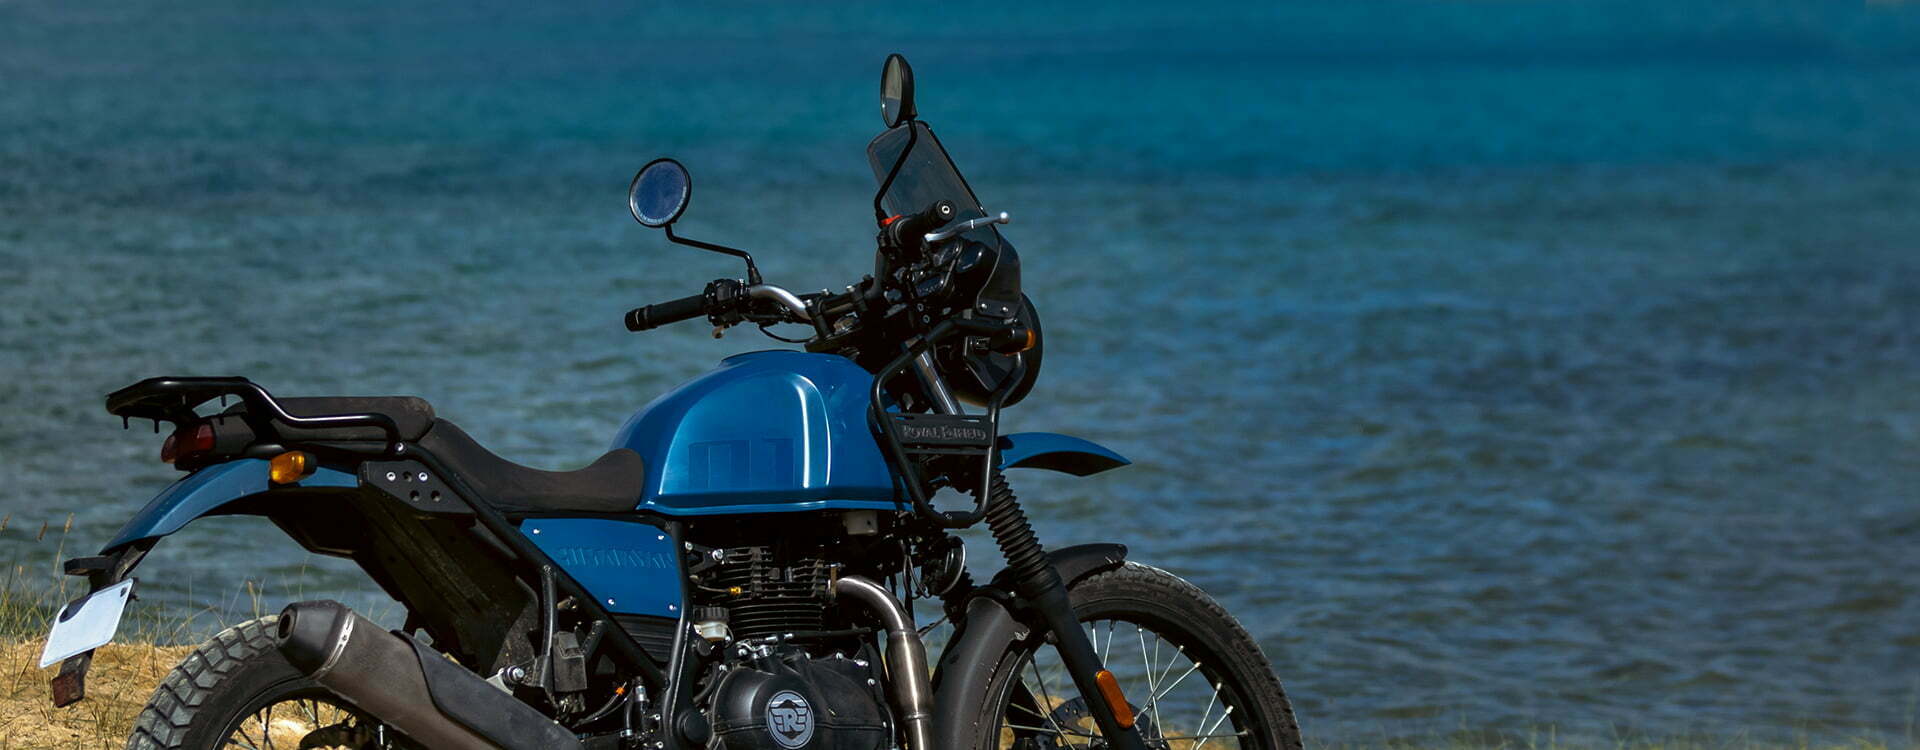 Three New Colors For Royal Enfield Himalayan Launched (3)